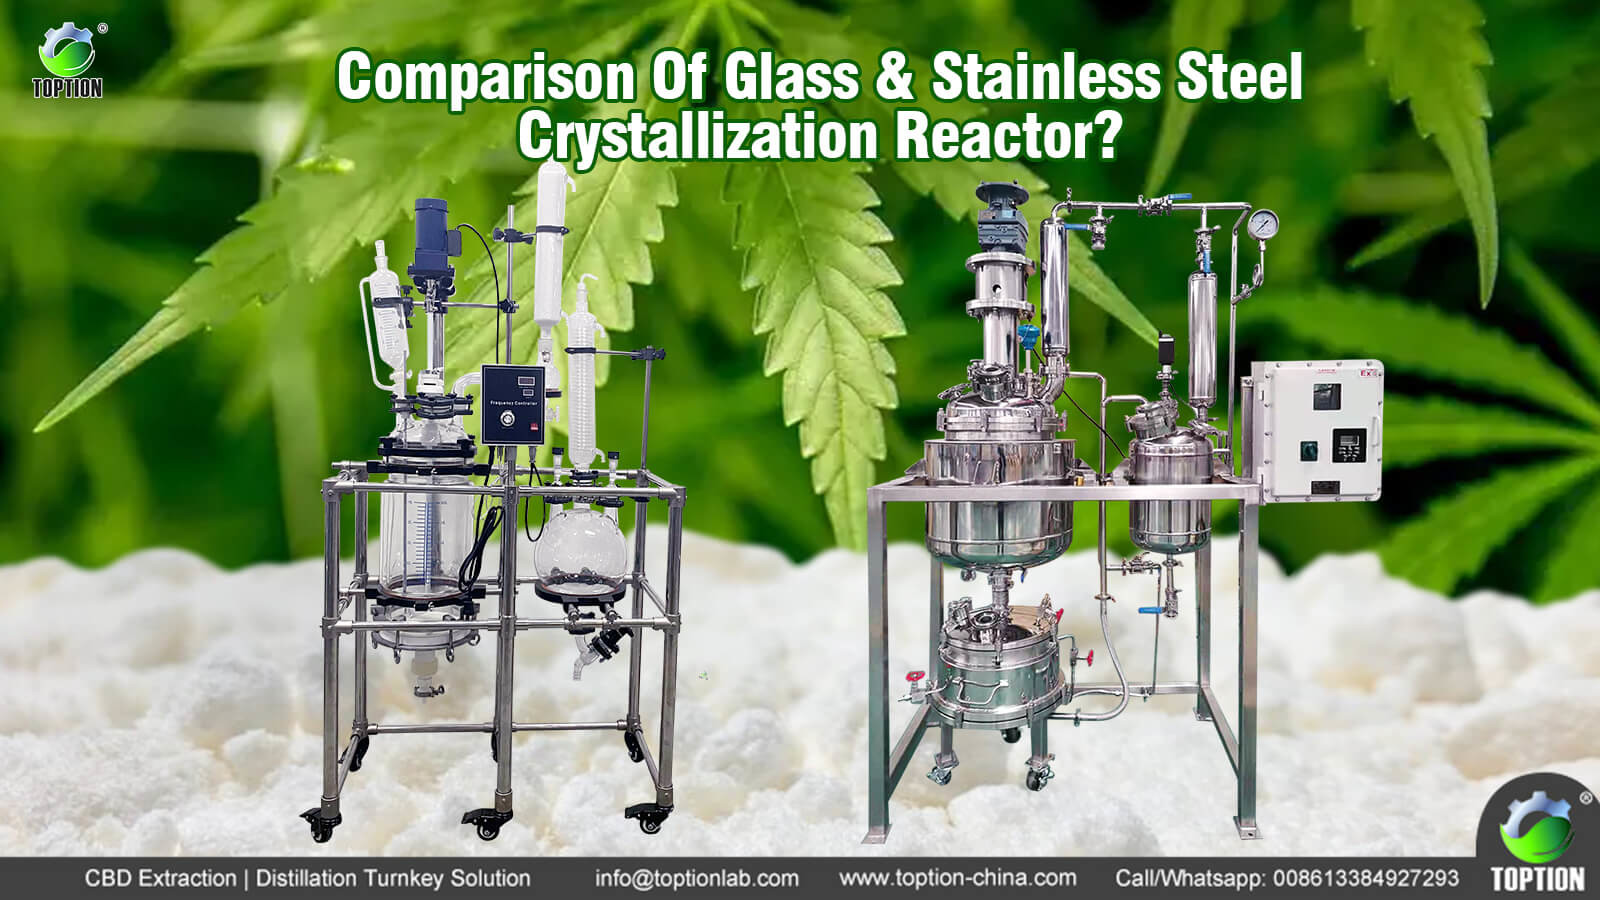 latest company news about Jacketed reactor crystallization reactors stainless steel and glass material comparison  0